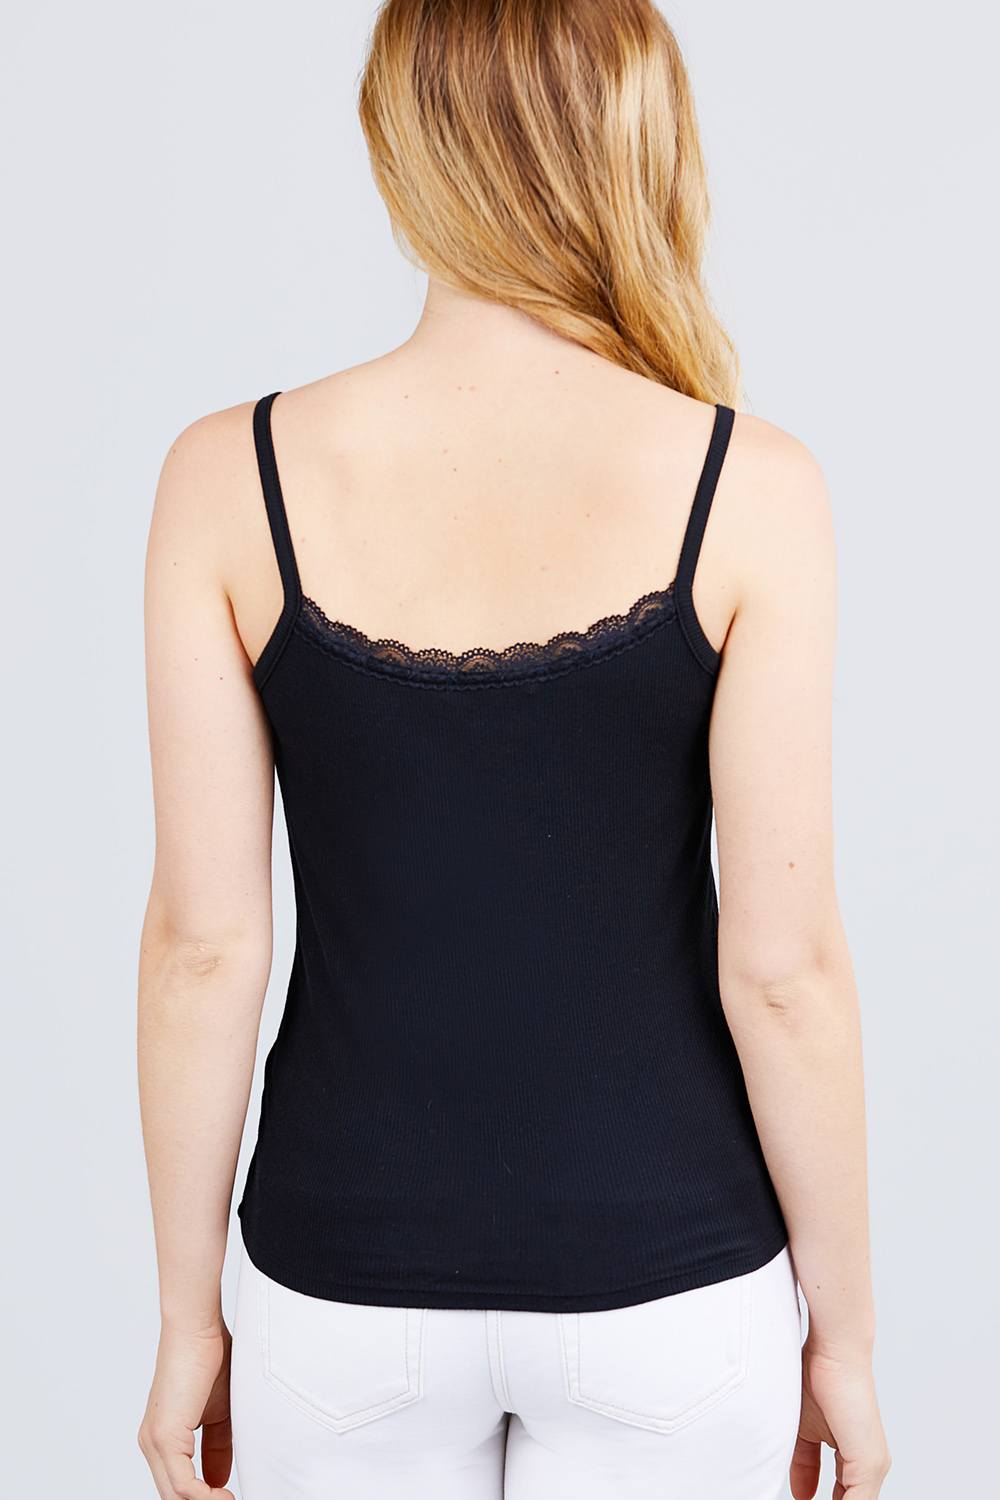 Lace Trim Rib Cami Knit Top - LOLA LUXE